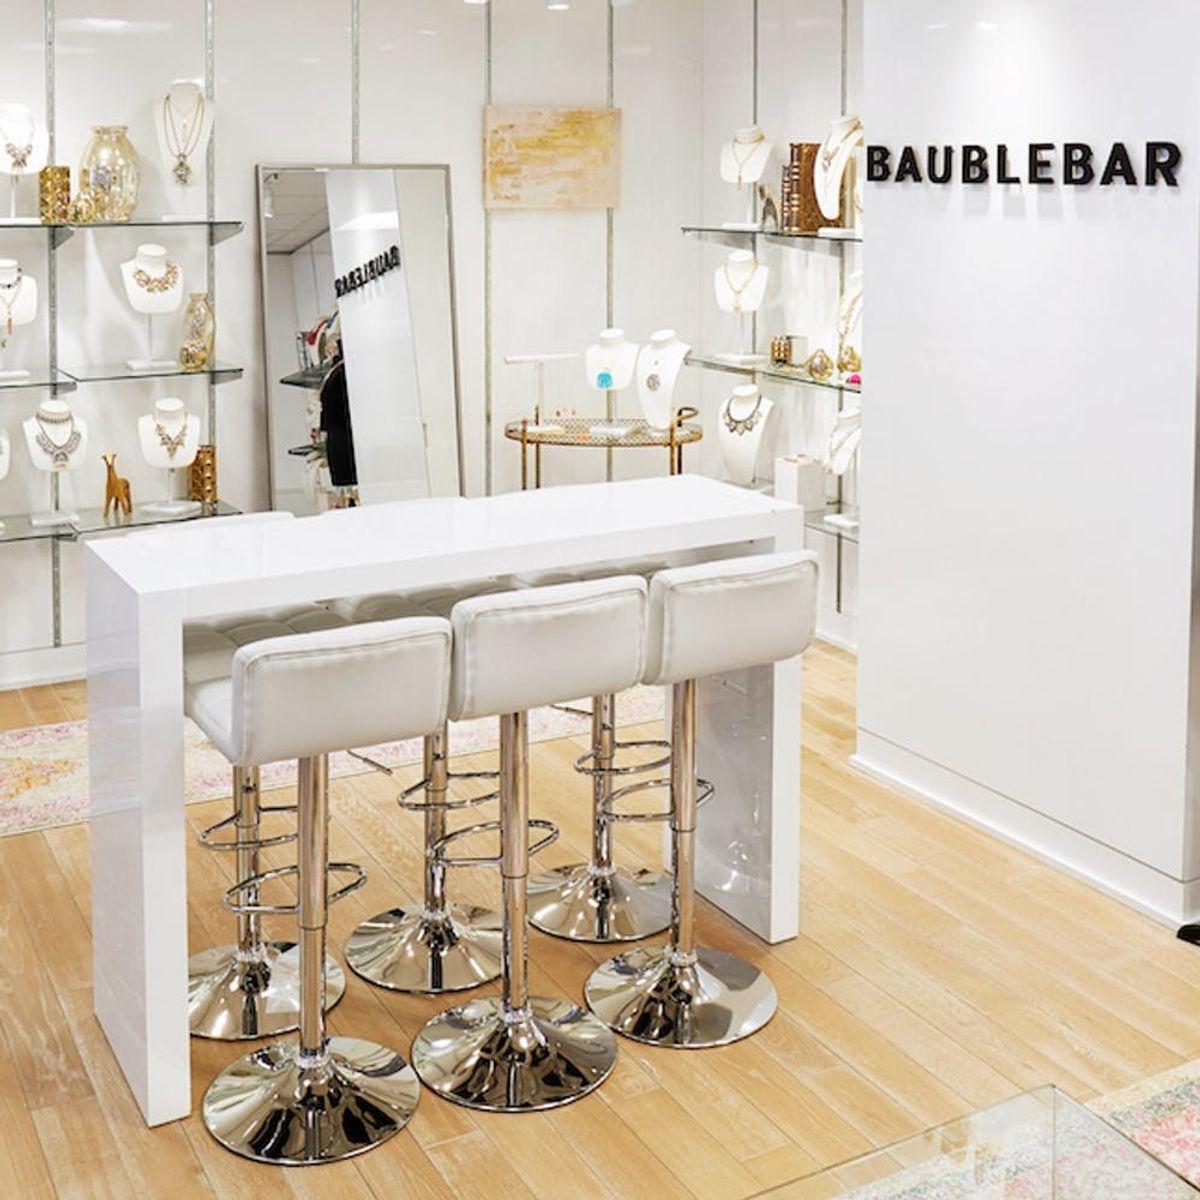 How Two BFFs Launched BaubleBar Together